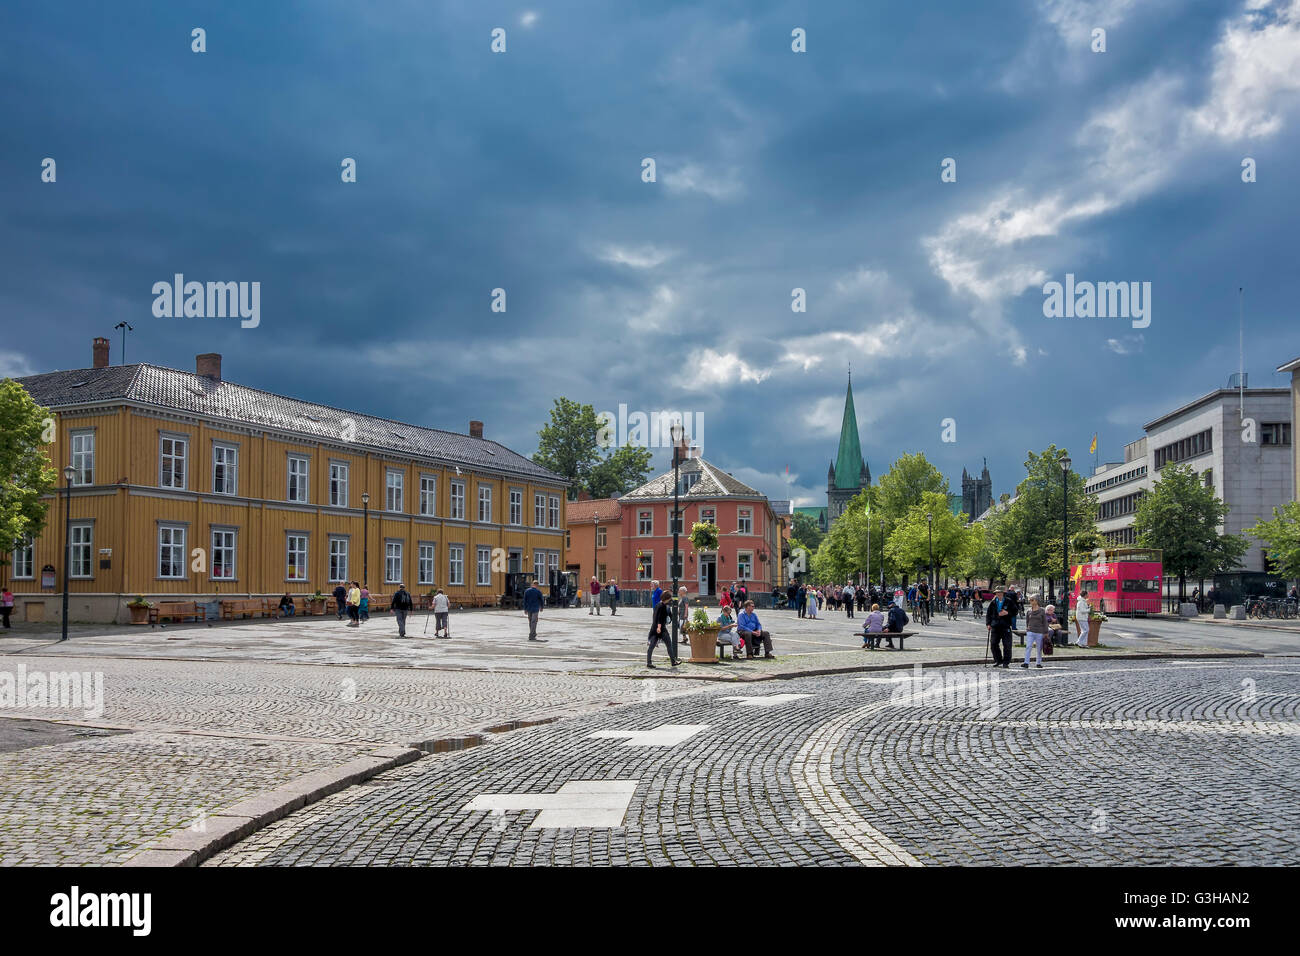 Storm Clouds Gathering In Torvet Square Trondheim Norway Stock Photo